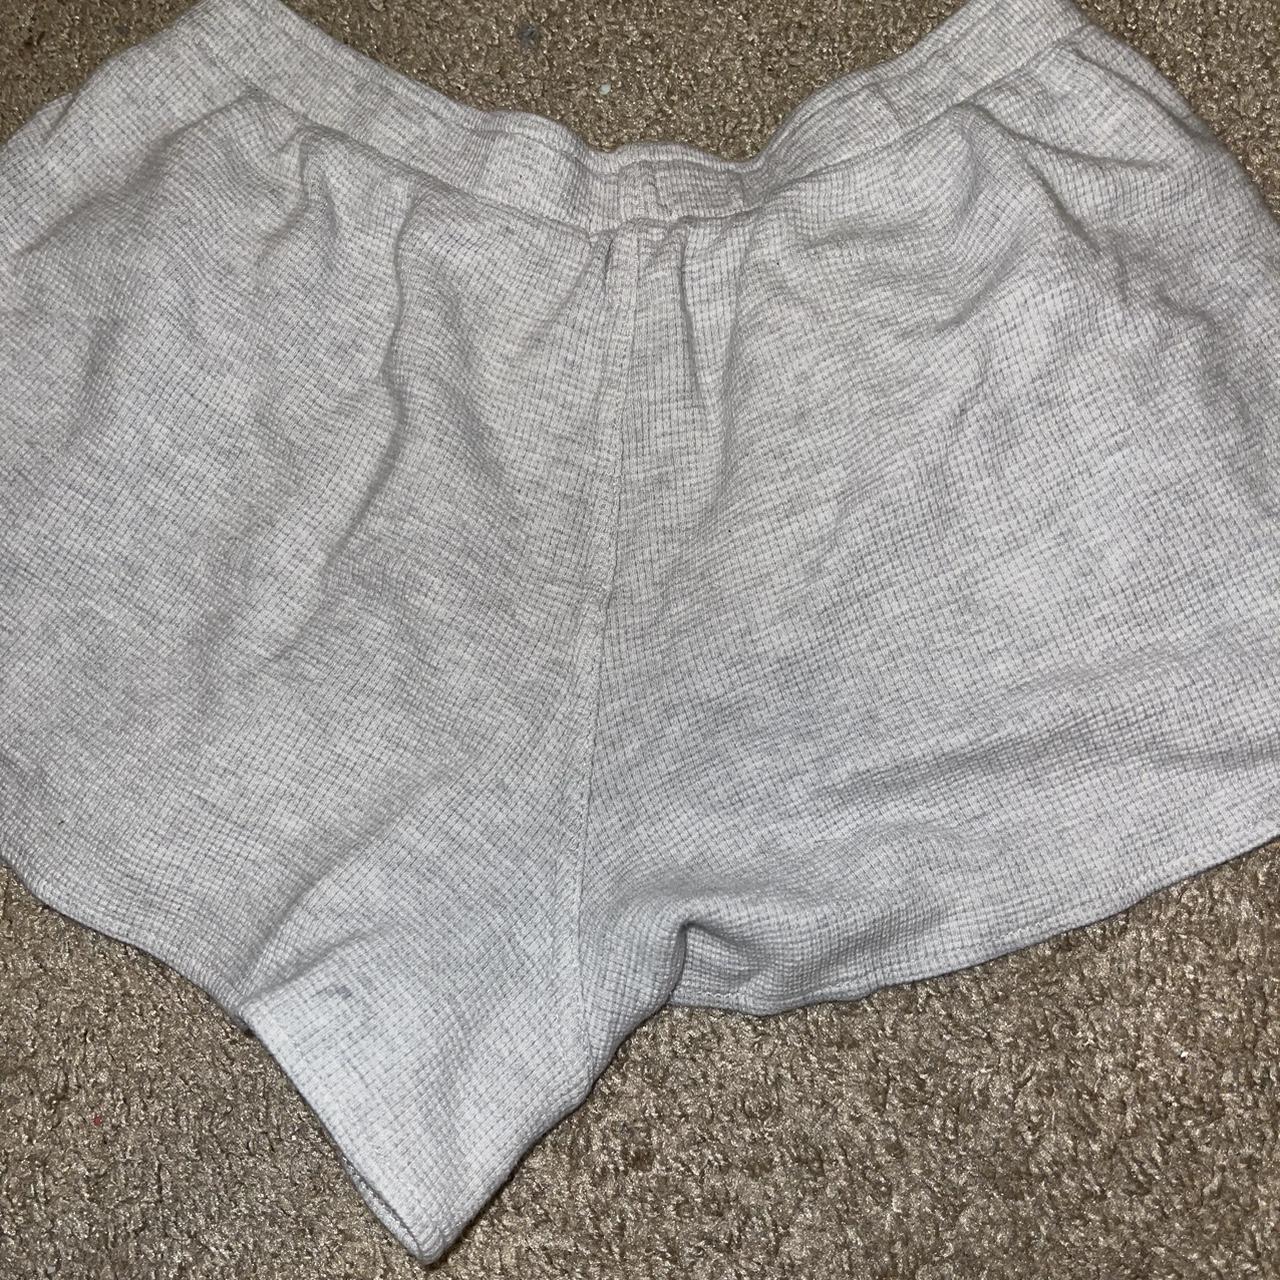 Brandy Melville Grey Shorts! These are drawstring... - Depop